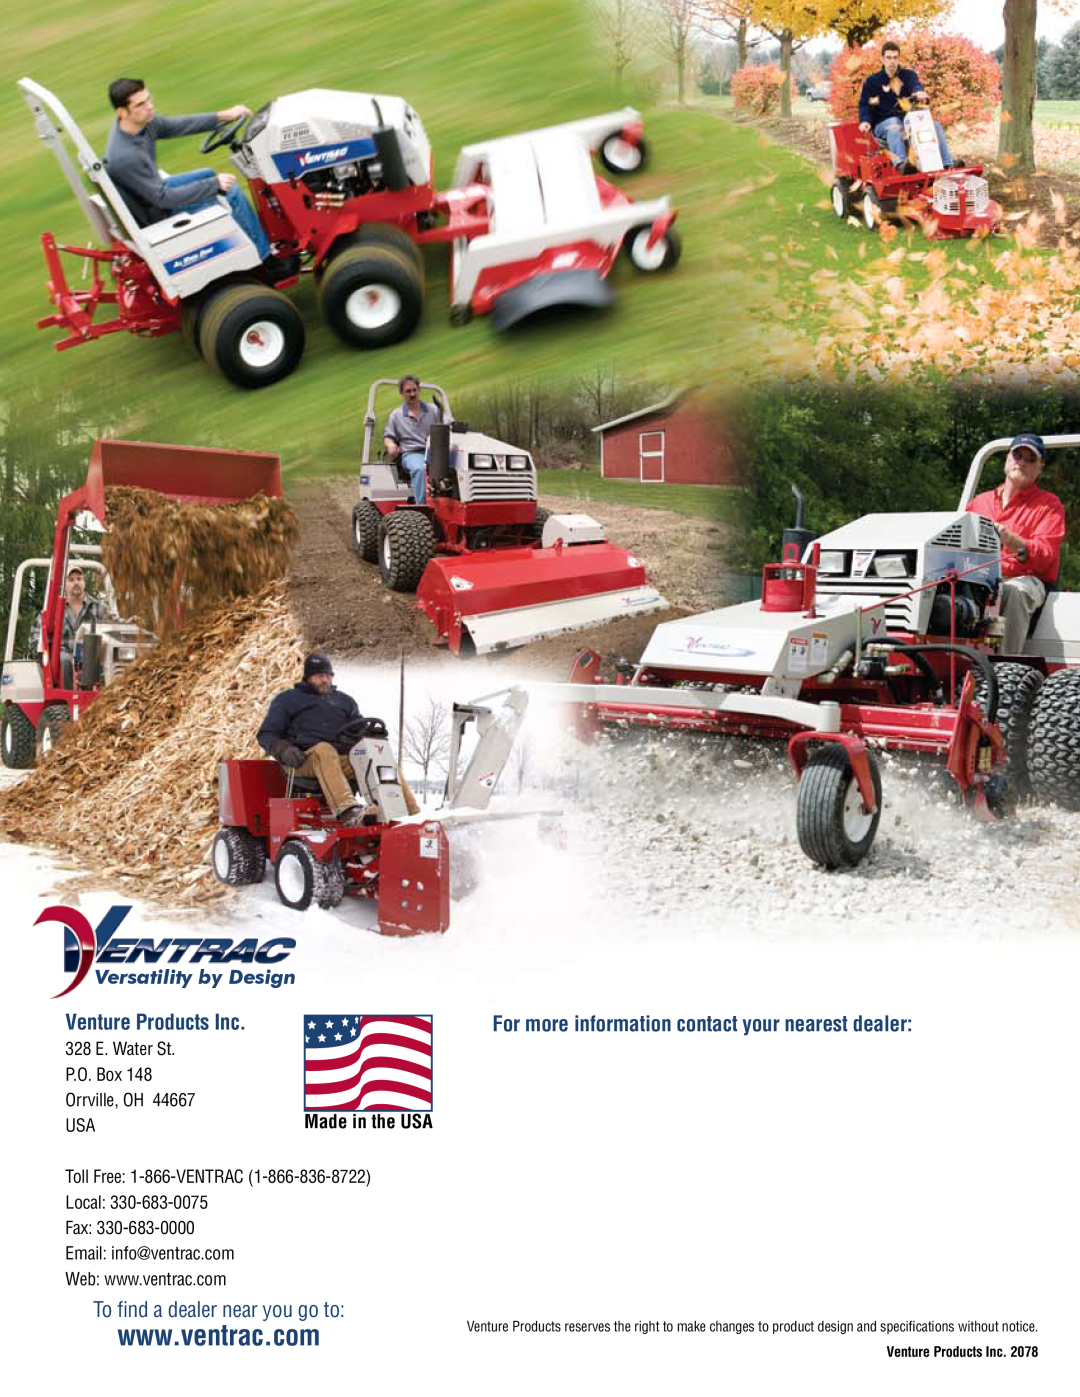 Venture Products 7000 series, S-16 manual Versatility by Design, Made in the USA, 328 E. Water St P.O. Box Orrville, OH USA 